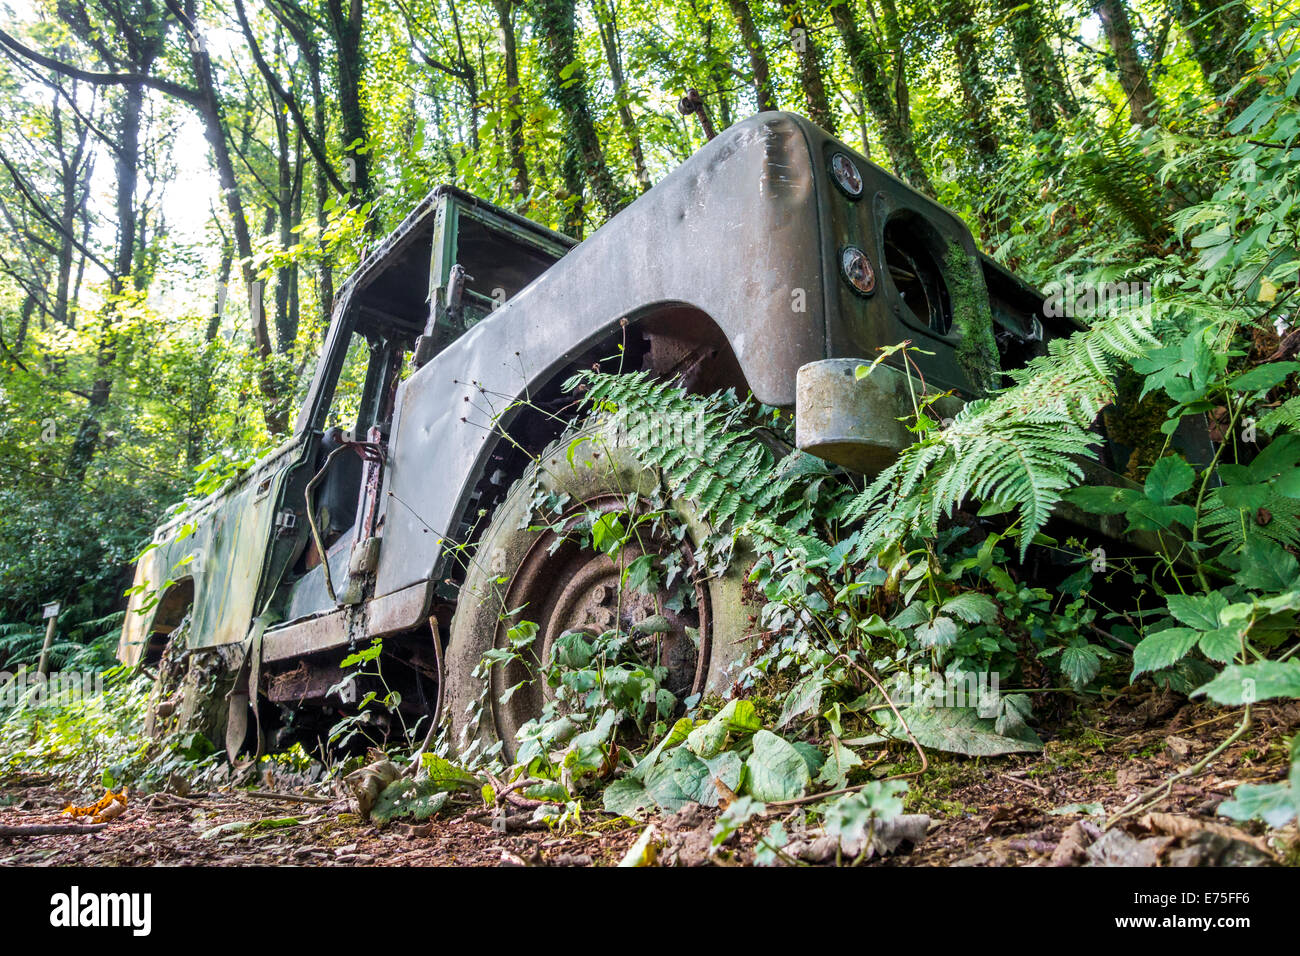 Abandoned Land Rover car overgrown with plants and weeds on a forest track Stock Photo